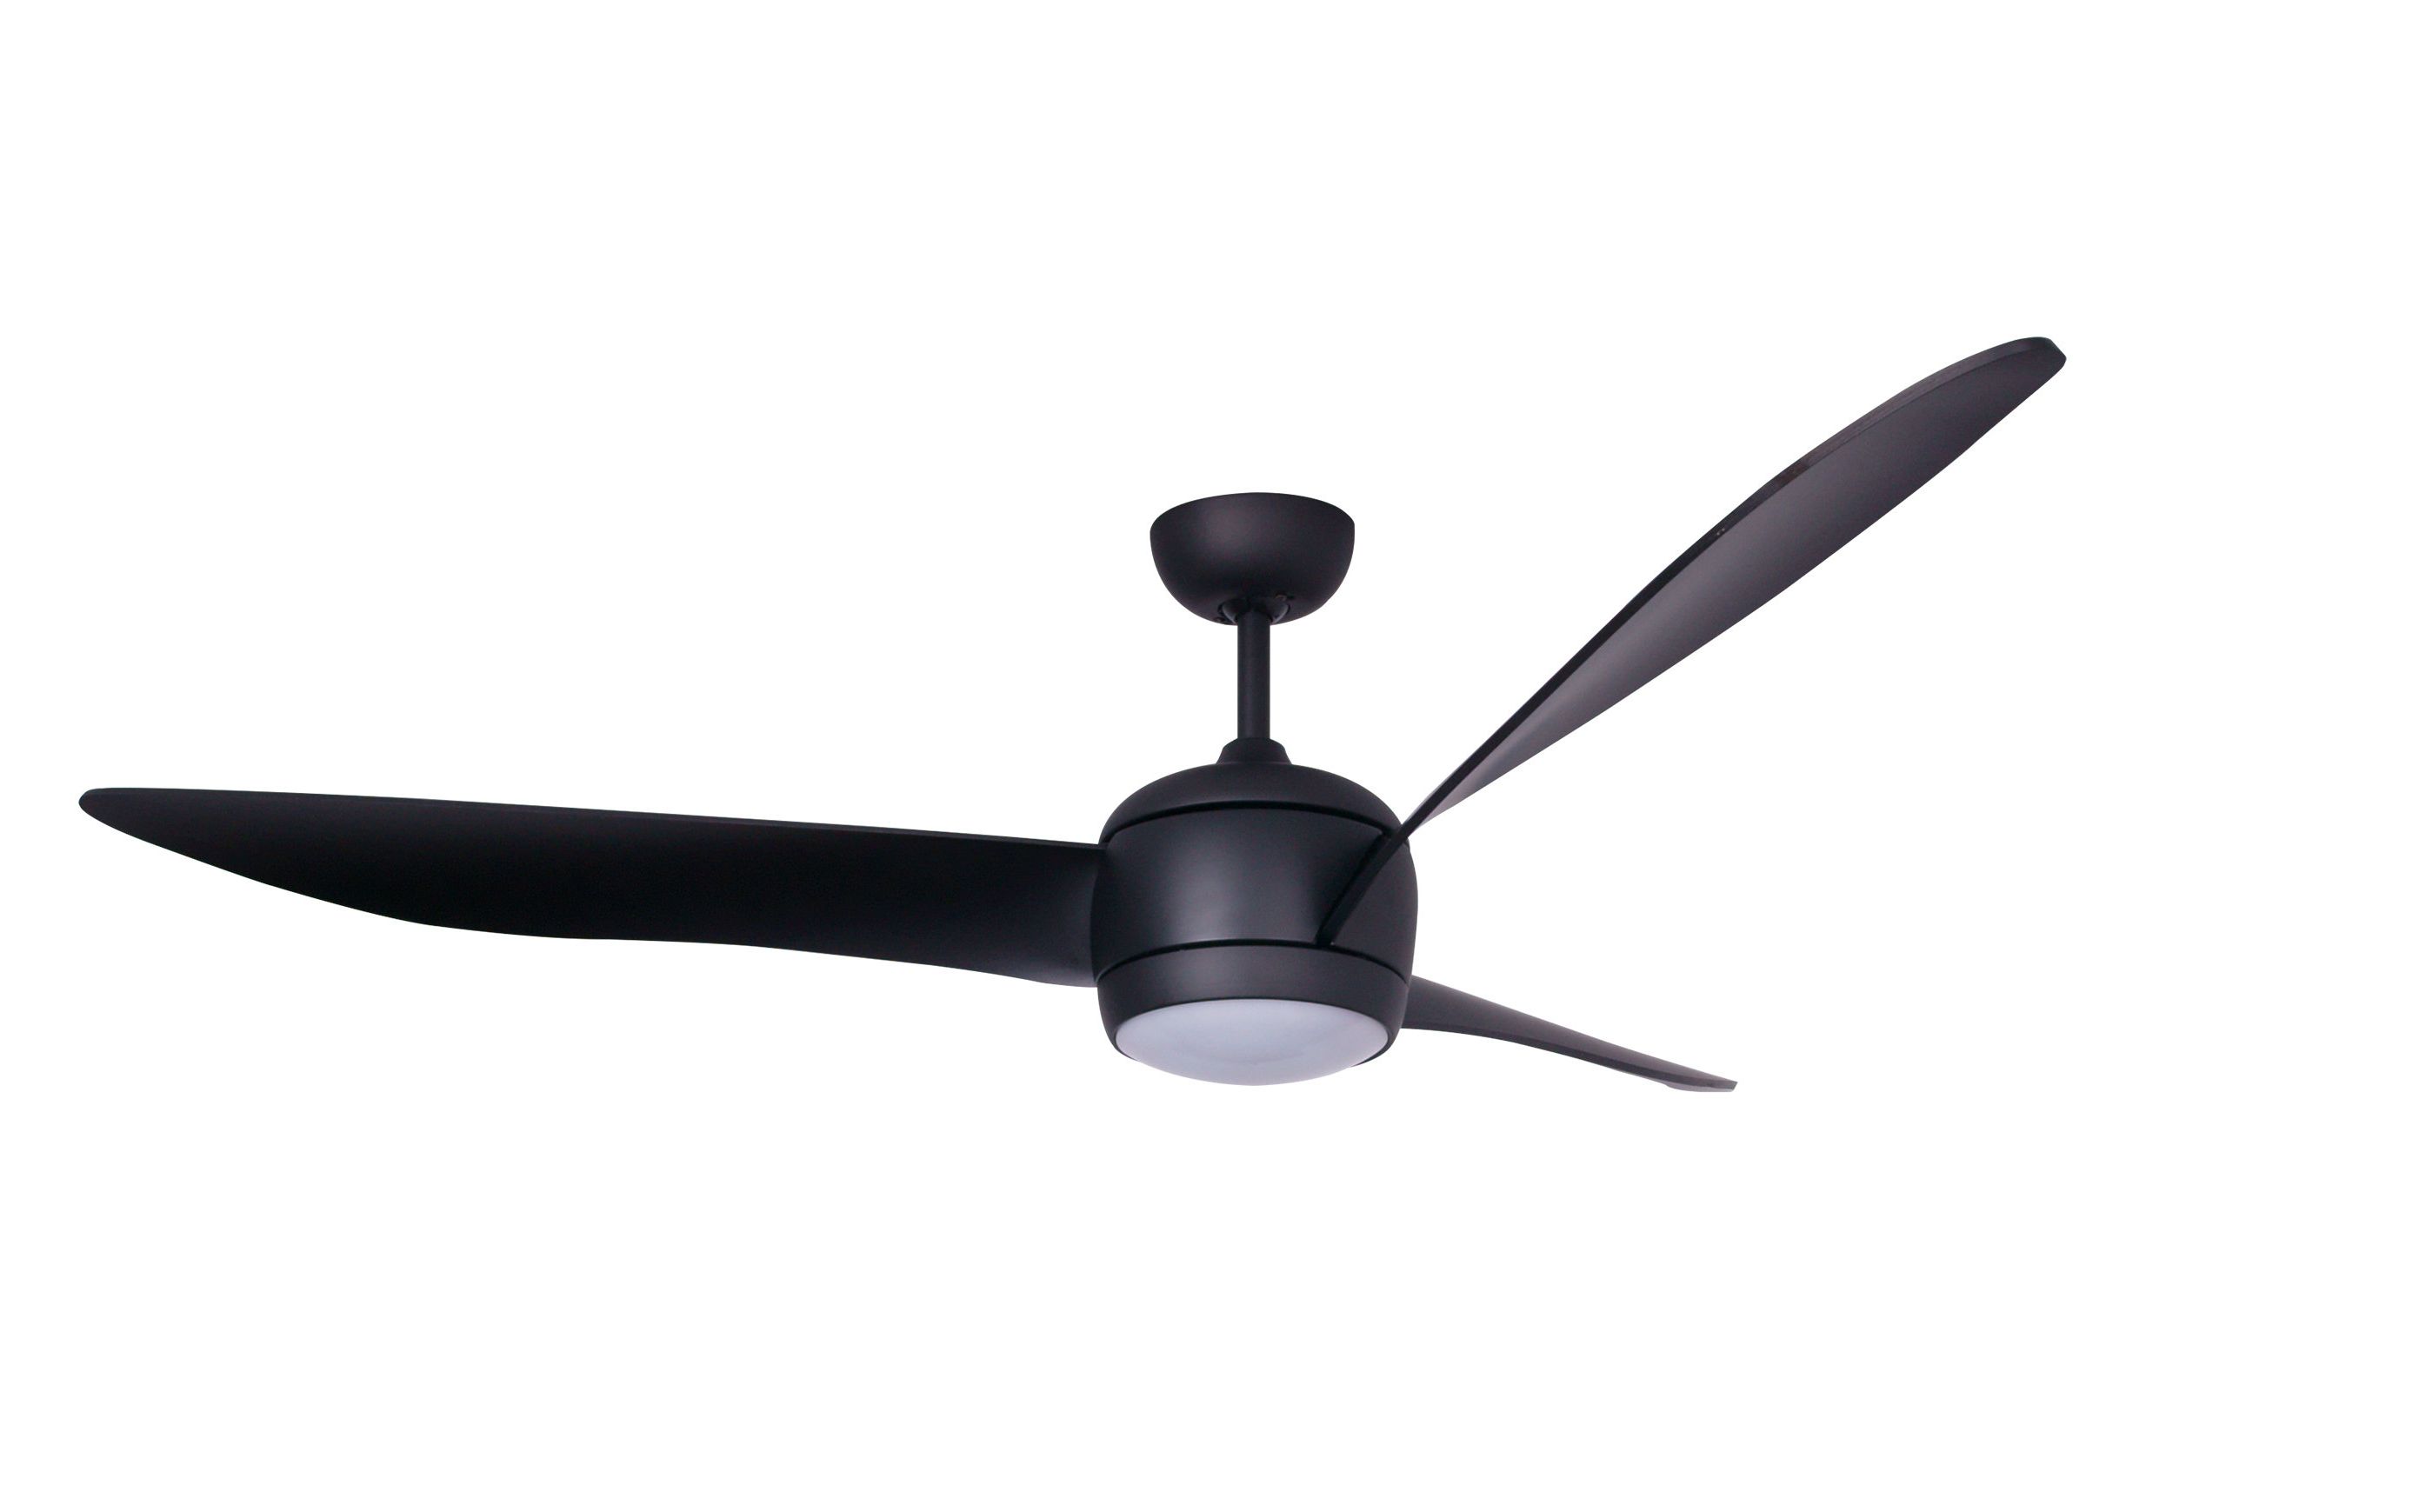 56" Niangua 3 Blade Led Ceiling Fan With Remote, Light Kit Included For Recent Glasgow 7 Blade Ceiling Fans (View 16 of 20)